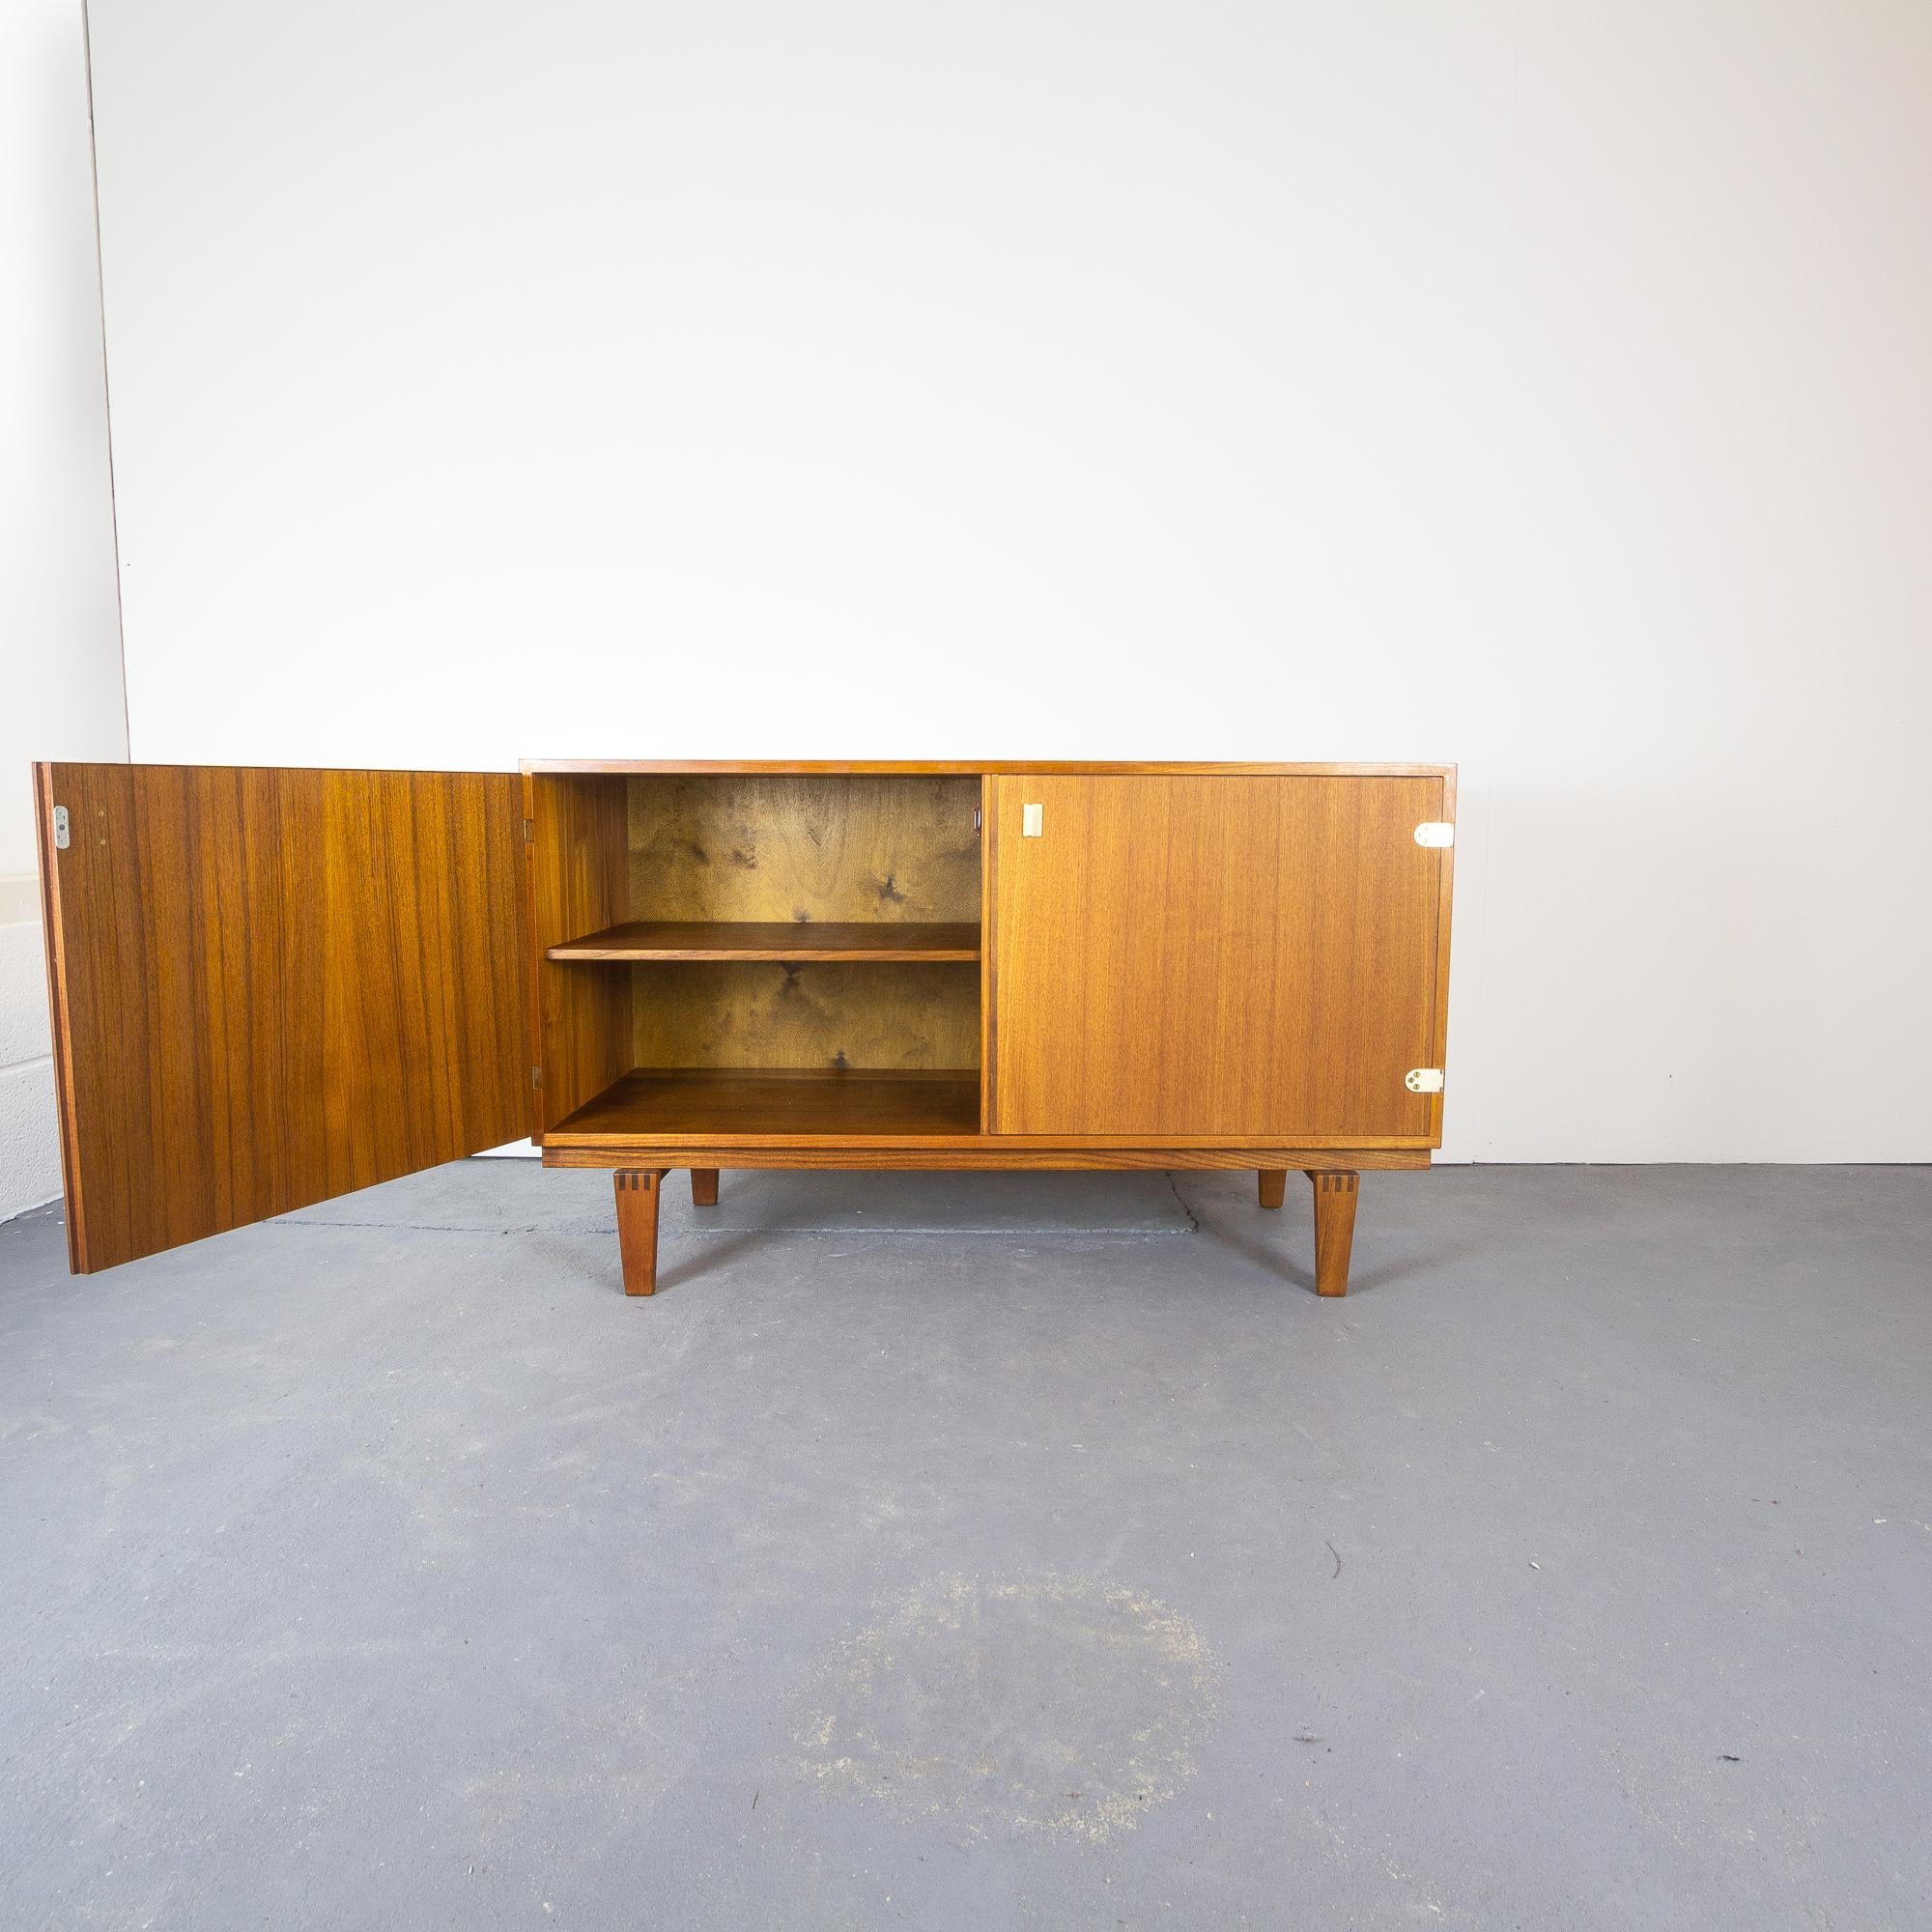 Elegant, small teak sideboard designed by Peter Løvig Nielsen for Løvig, Denmark 1960s. The teak is in great condition and has been fully refurbished. Two hinged doors with brass details. The feet have beautifully crafted dovetail joints. Inside